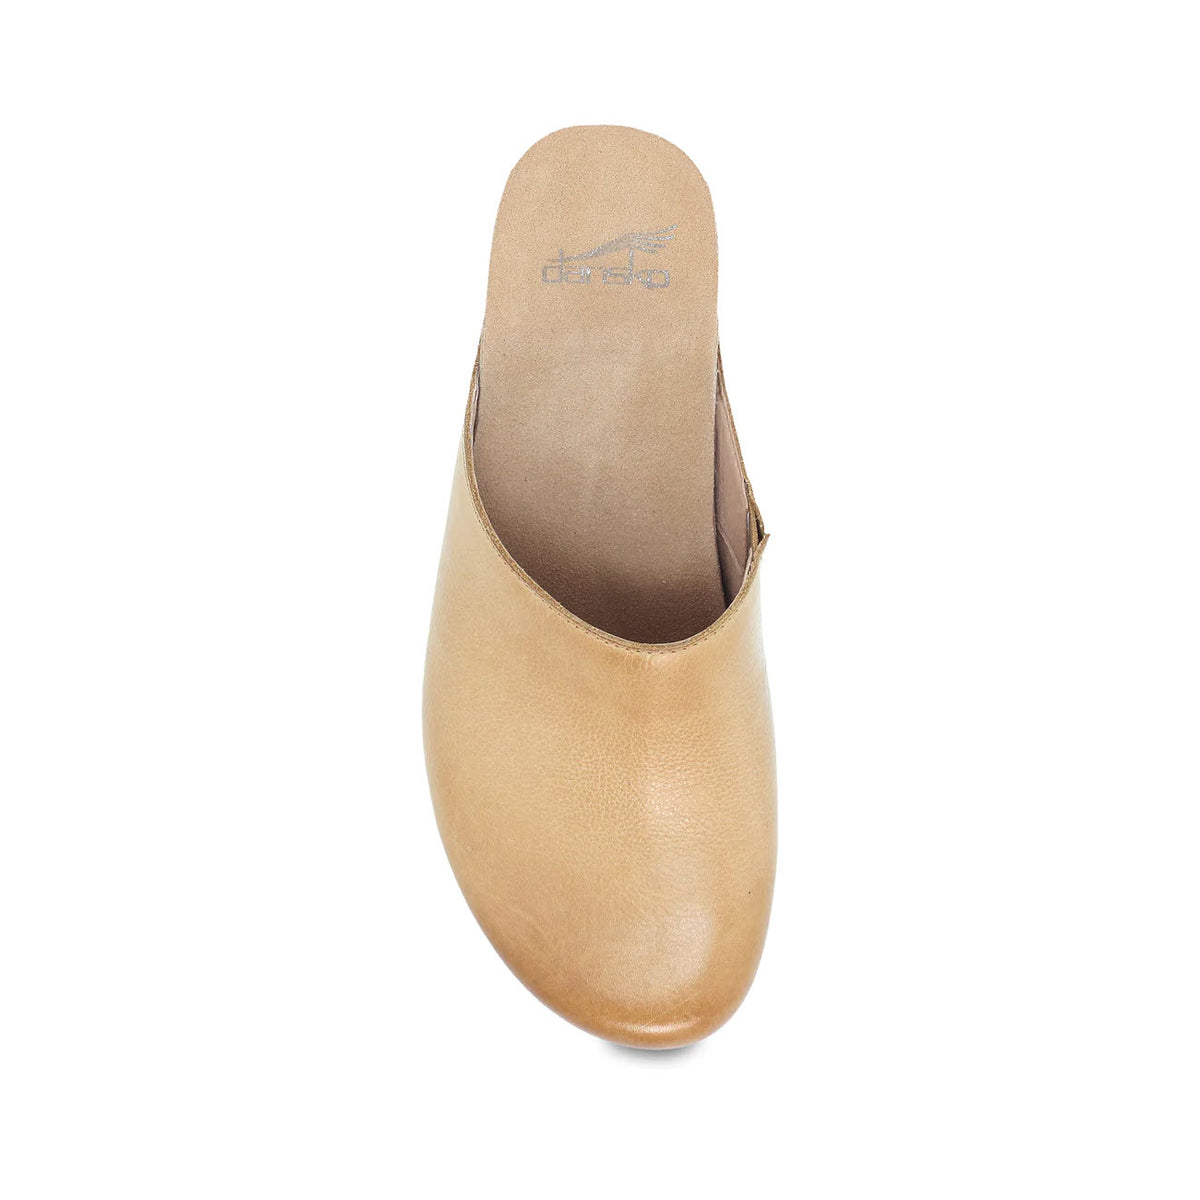 Top view of a tan leather Dansko Talulah mule on a white background.